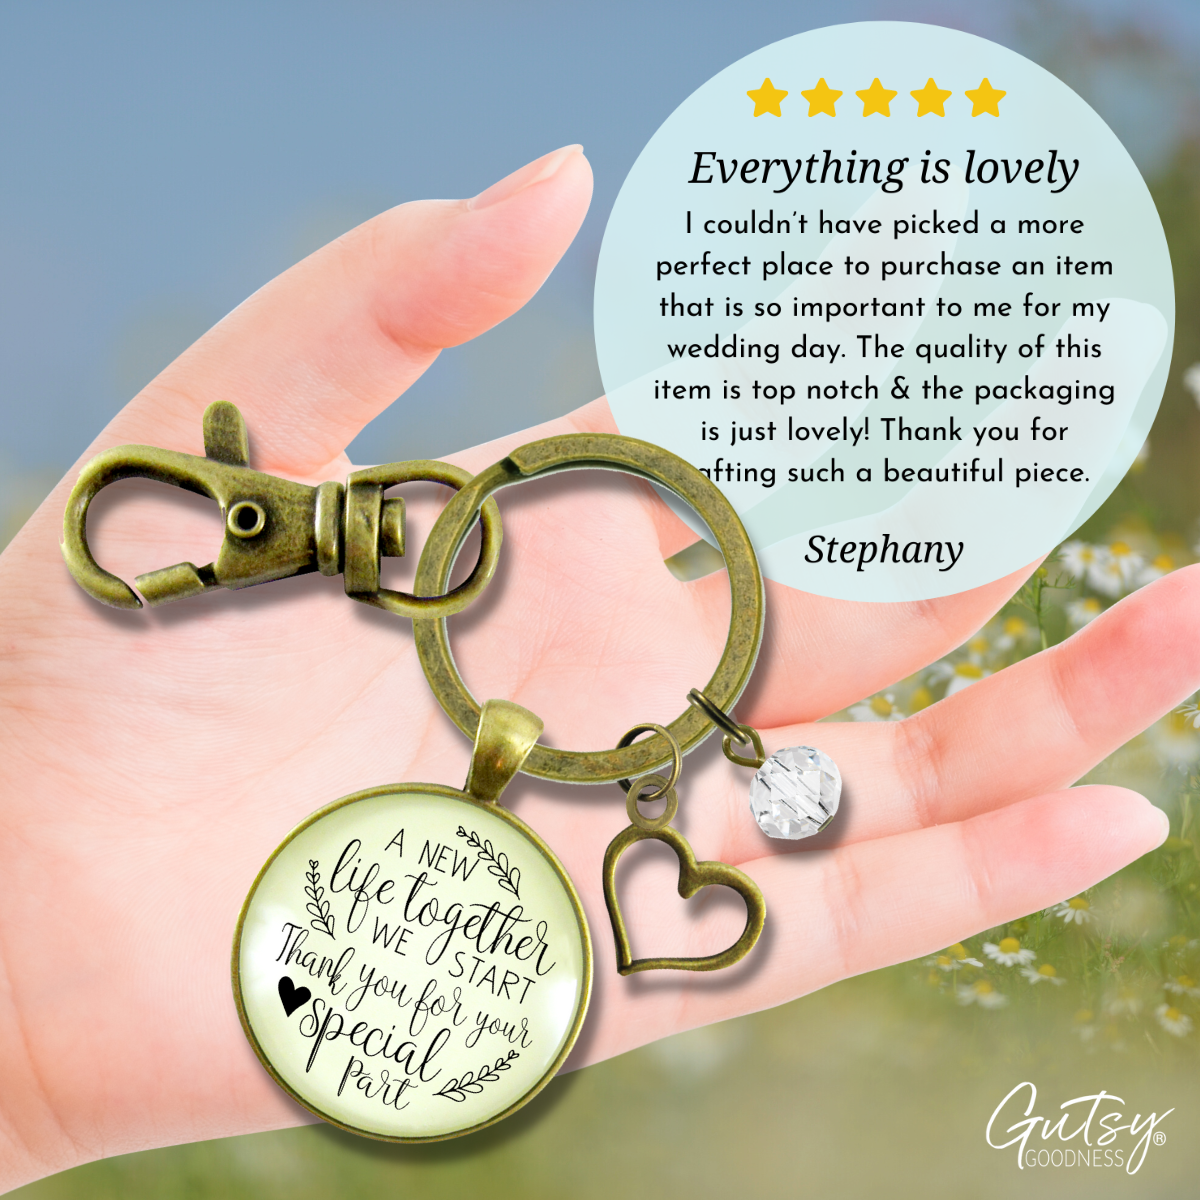 Wedding Officiant Gift Keychain A New Life We Start Rustic Heart Thank You Card  Keychain - Unisex - Gutsy Goodness Handmade Jewelry